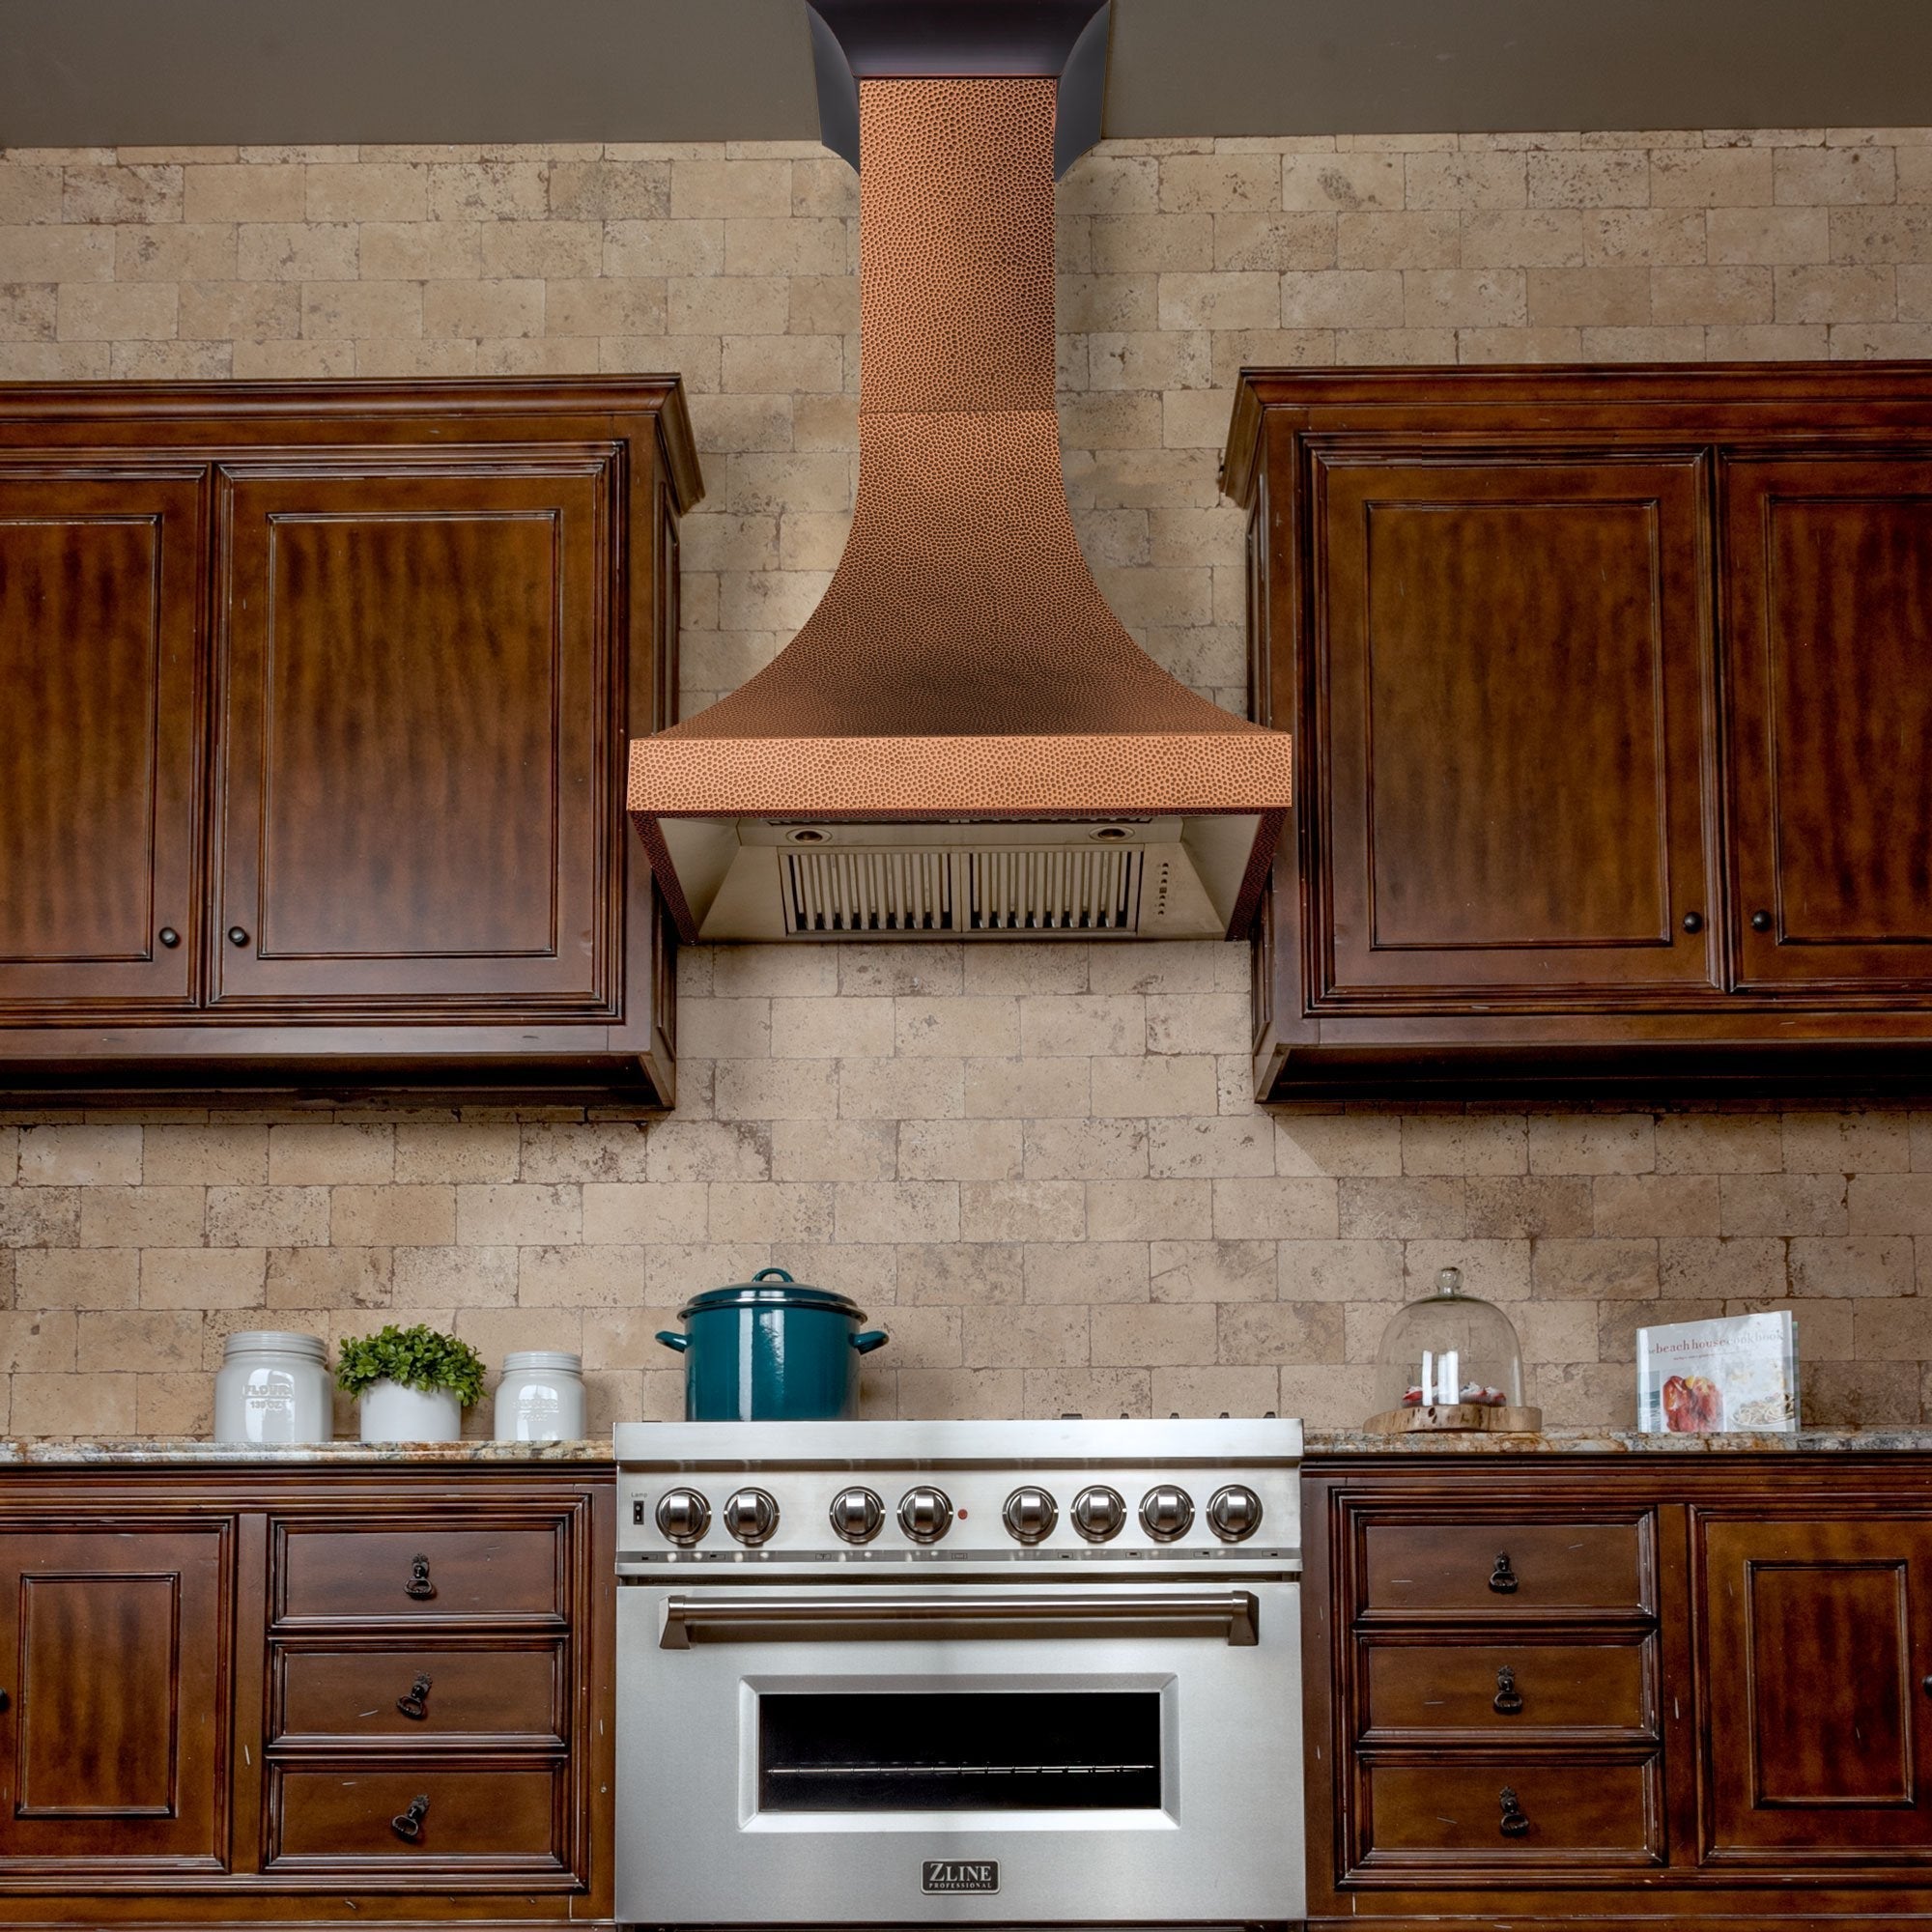 ZLINE Designer Series Hand-Hammered Copper Wall Mount Range Hood in a rustic kitchen with brown cabinets front.